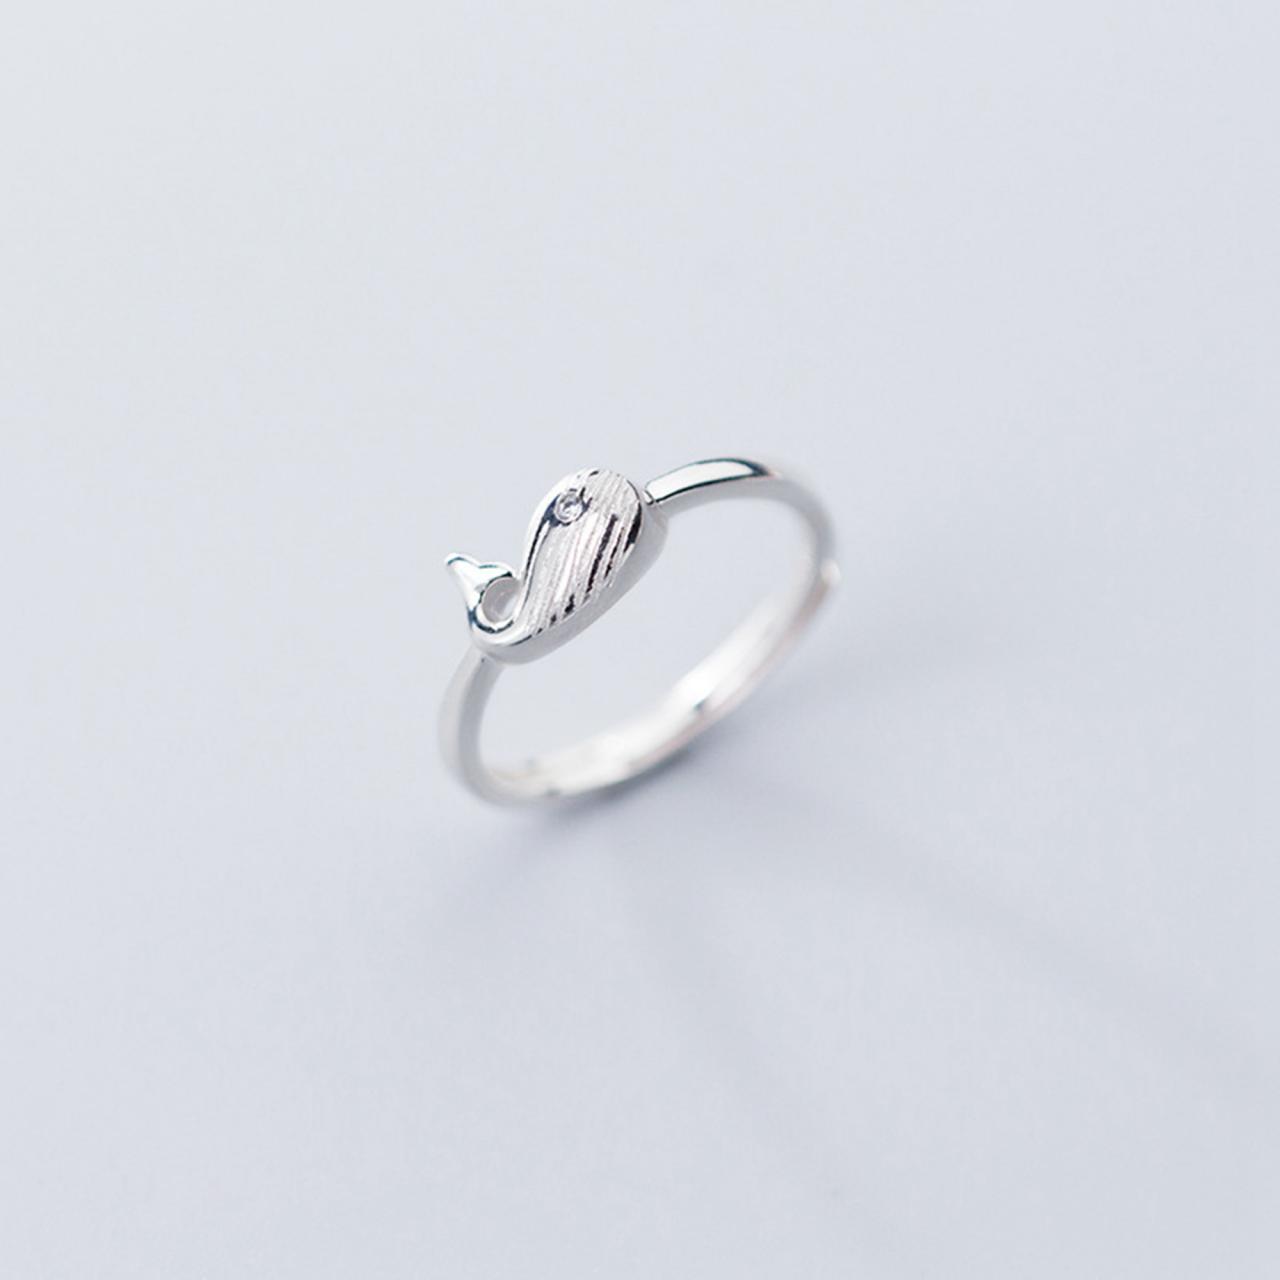 Glossy Whale Ring, Sterling Silver Adjustable Whale Ring, Minimalist Rings, Dainty Ring, Women Ring, Everyday Jewelry, Whale Ring